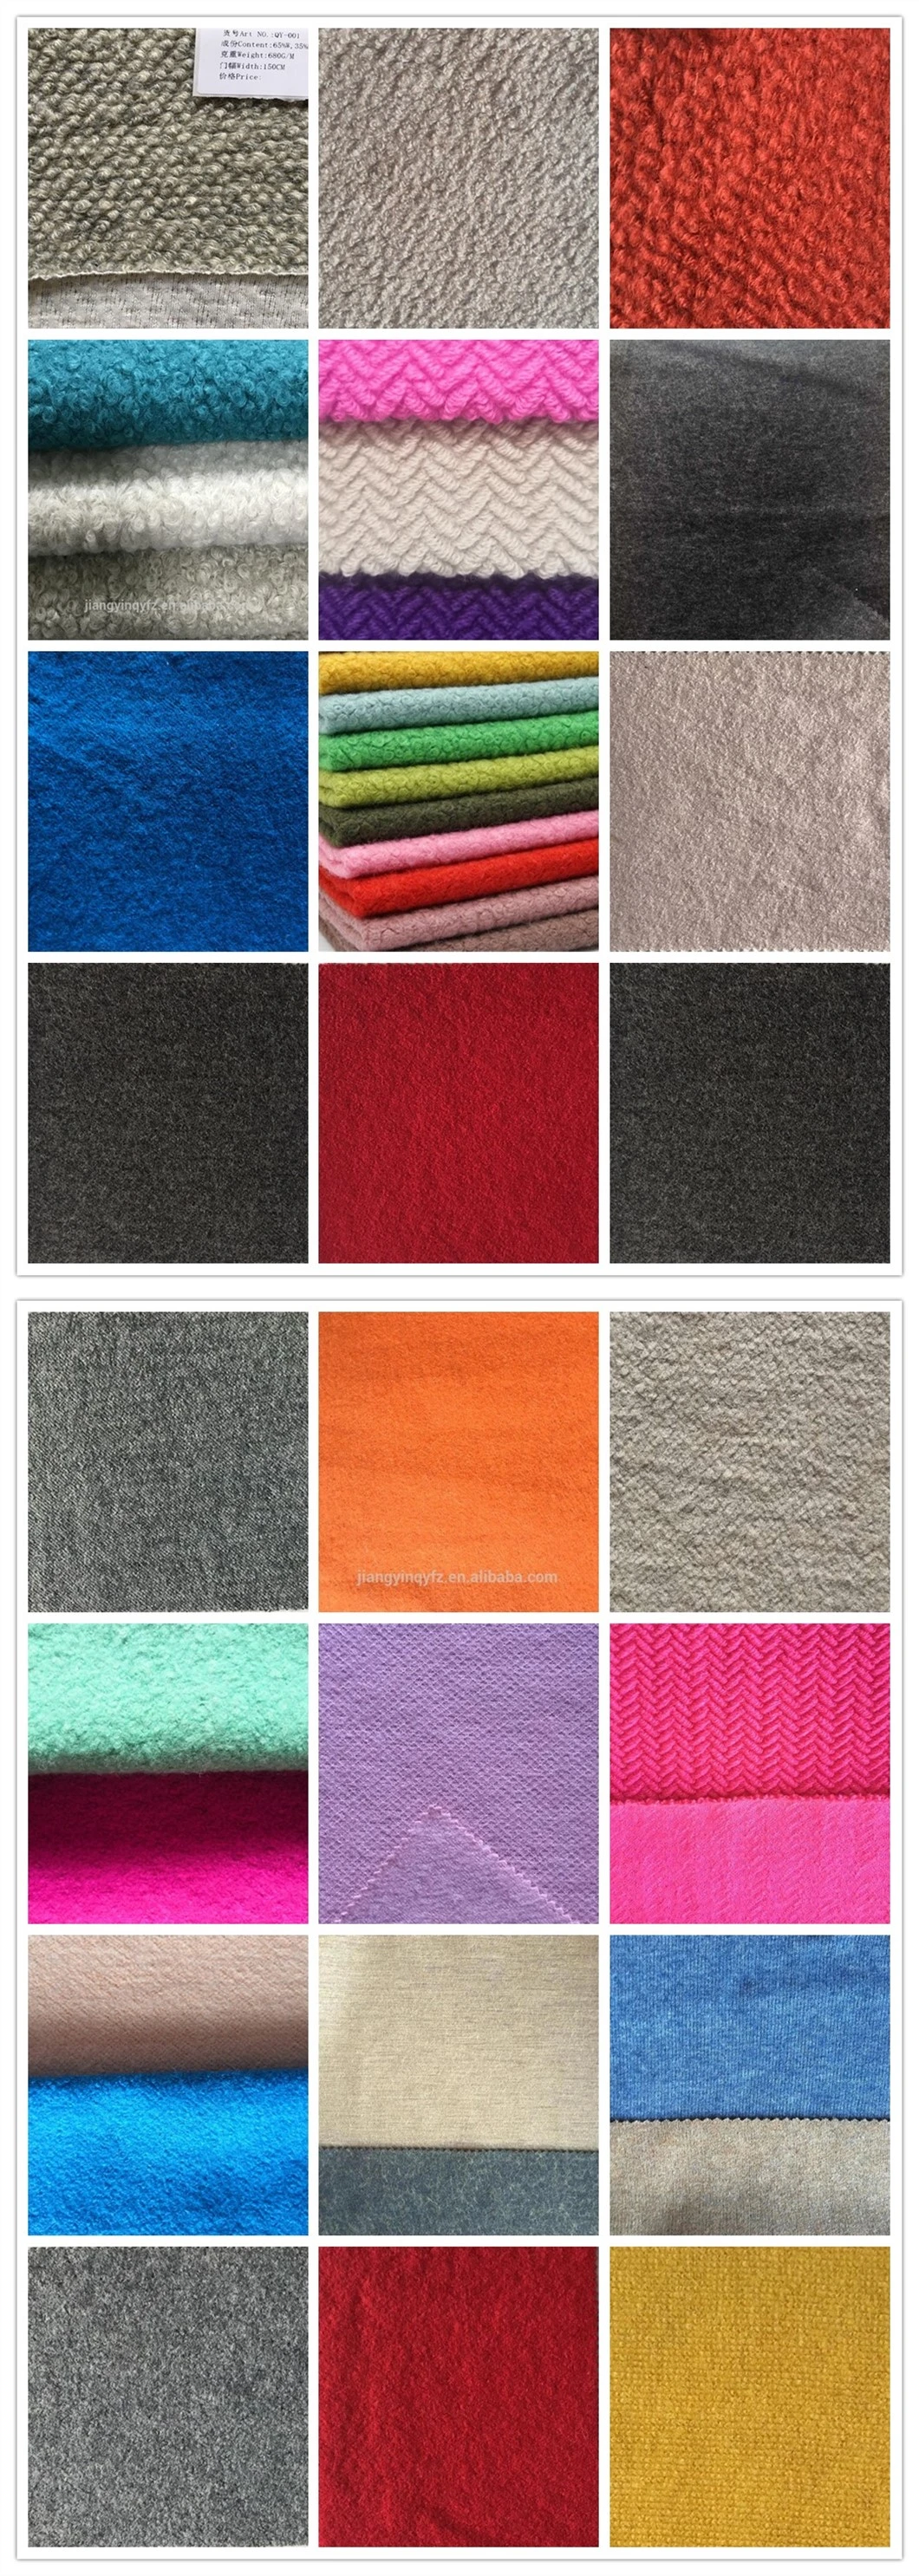 Chinese Products Promotion New Style Knitted Tr Interlock Woolen Fabric